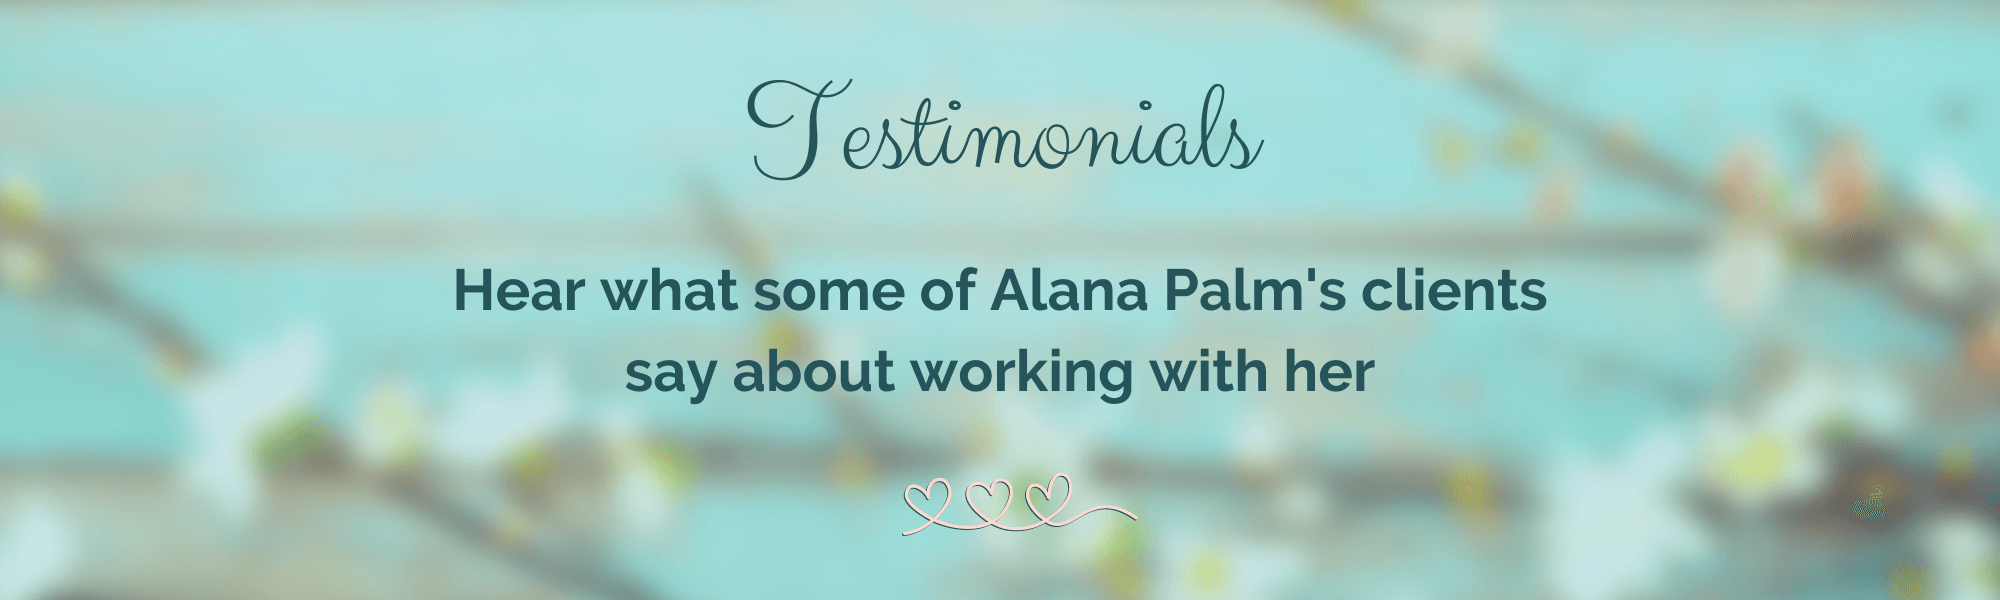 Testimonials Graphic with words